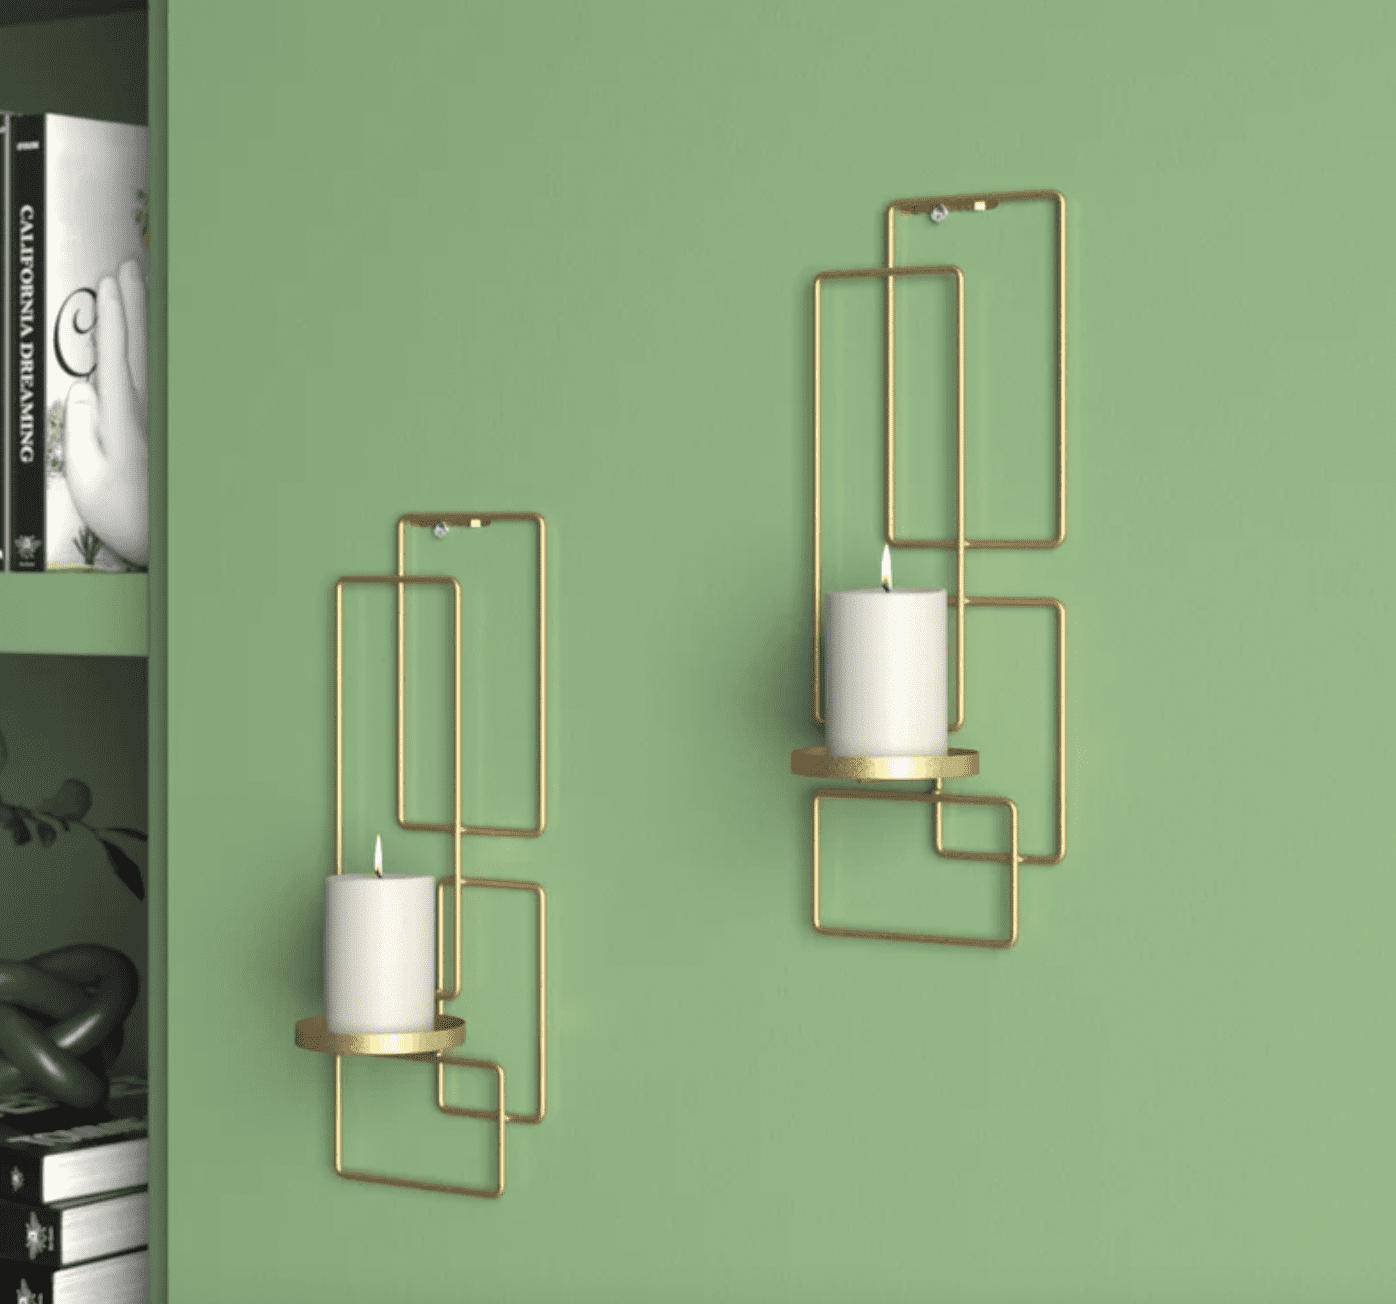 Candle Sconces Are the Cheapest, Easiest Way to Light Up a Dark